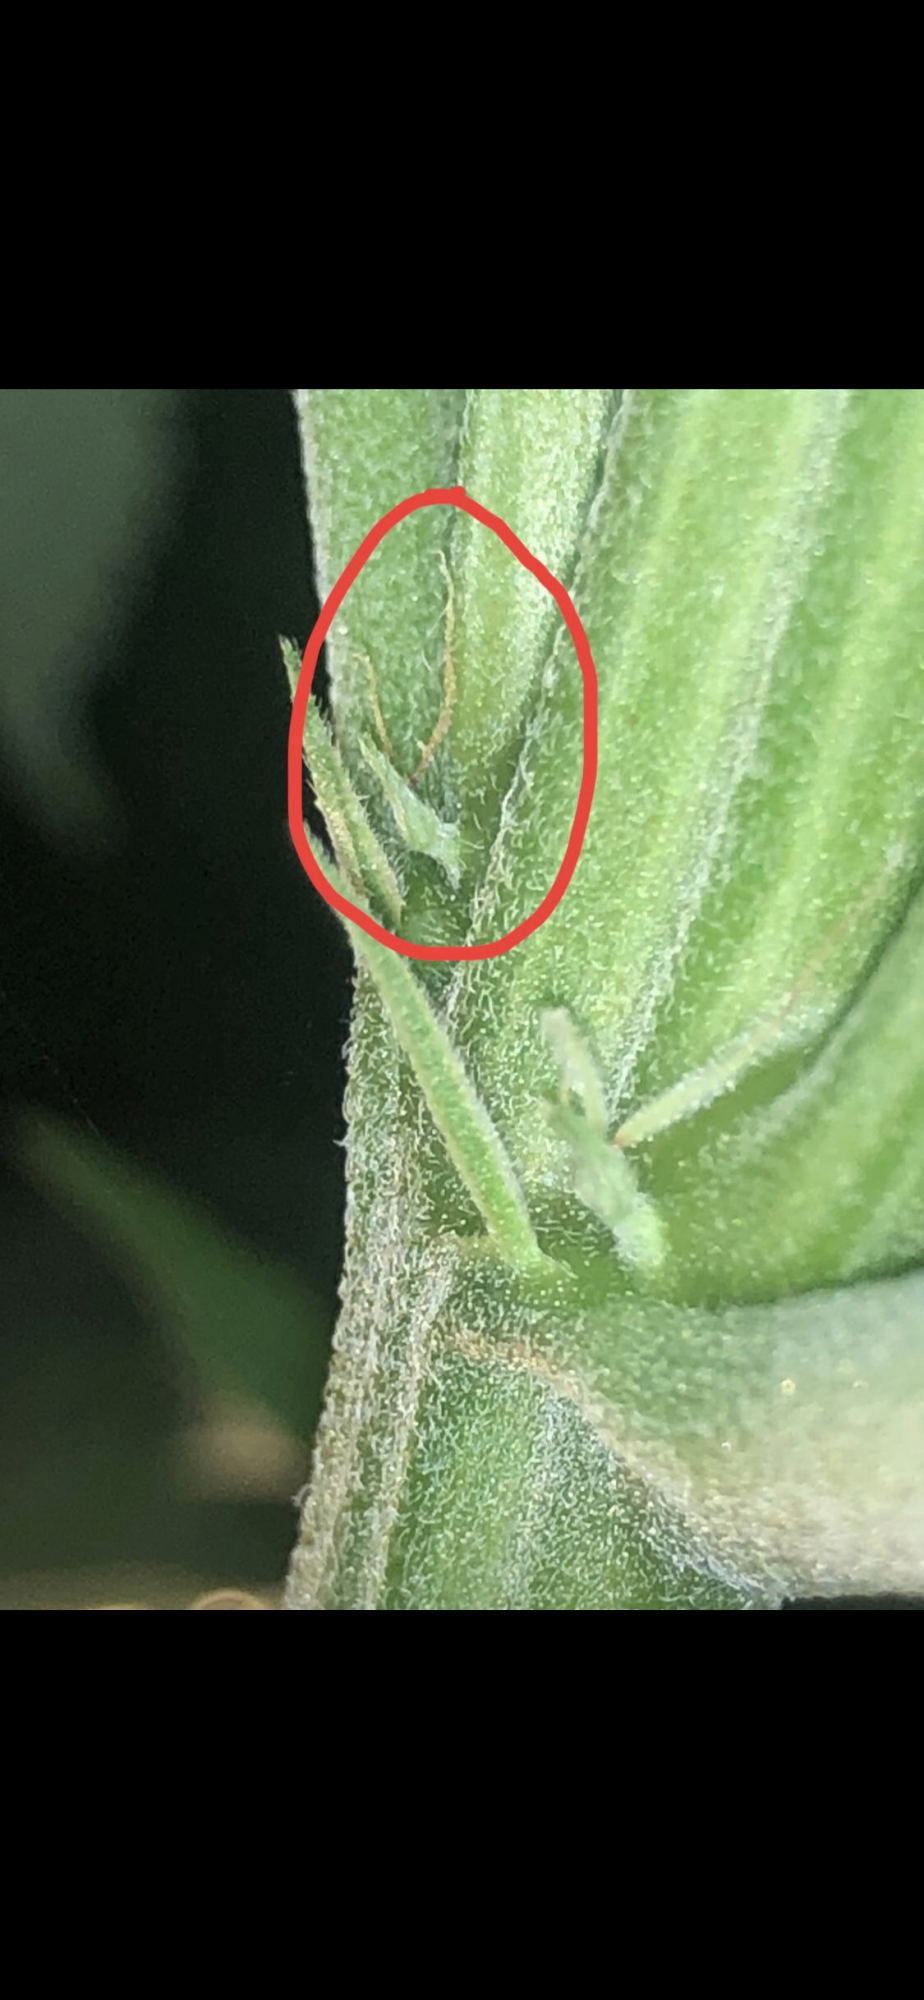 Plant wont flowering and pistils are turning brown